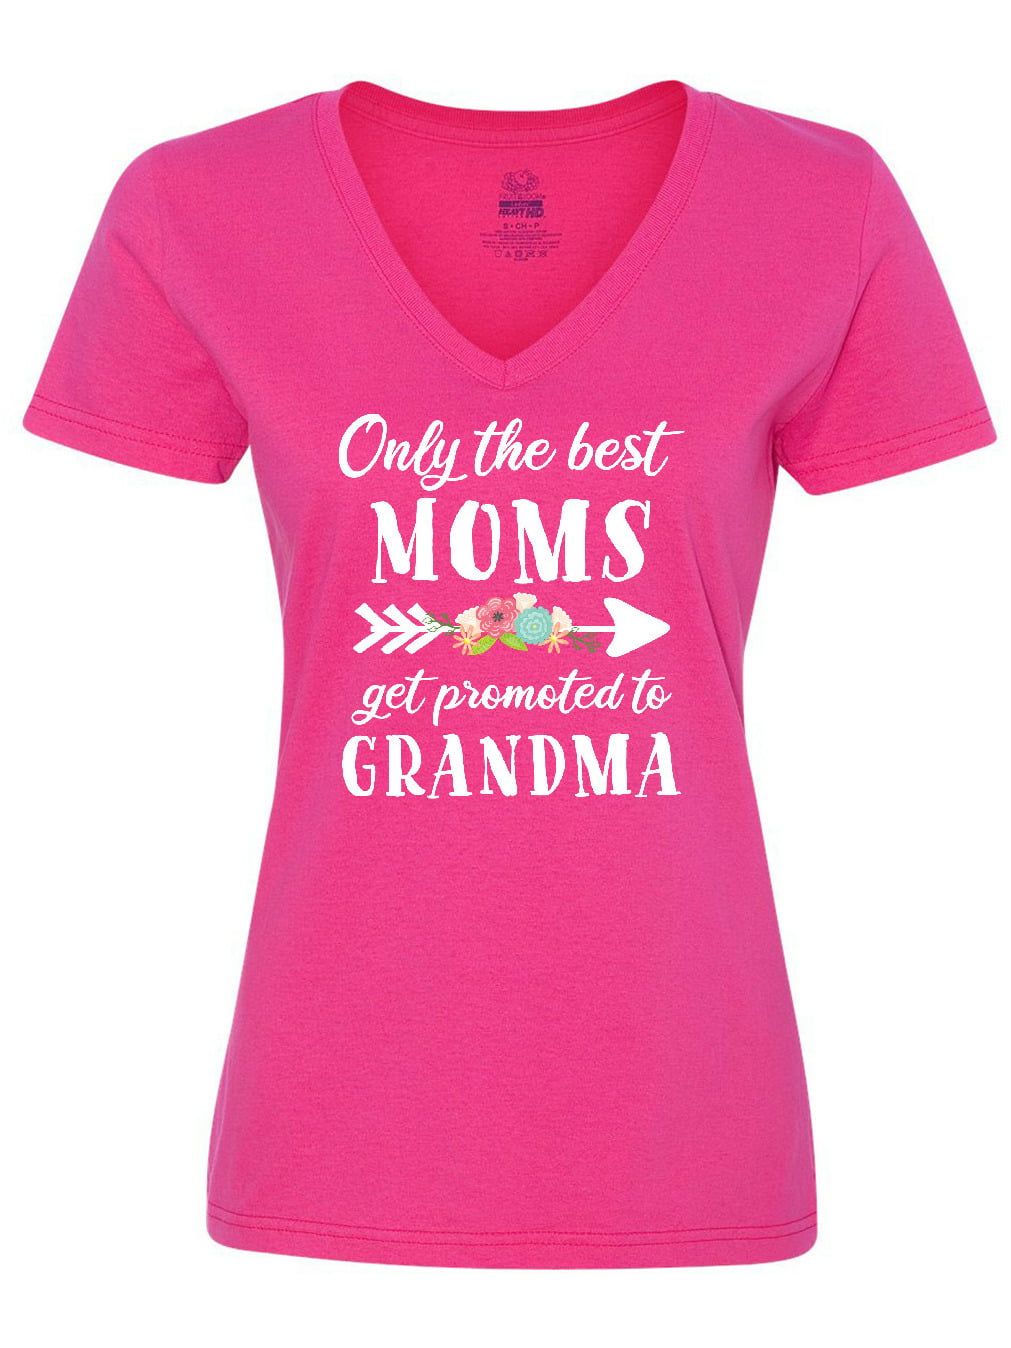 Frame and Towel Grandmother Shirt Pillow Only The Best Moms Get Promoted To Nana